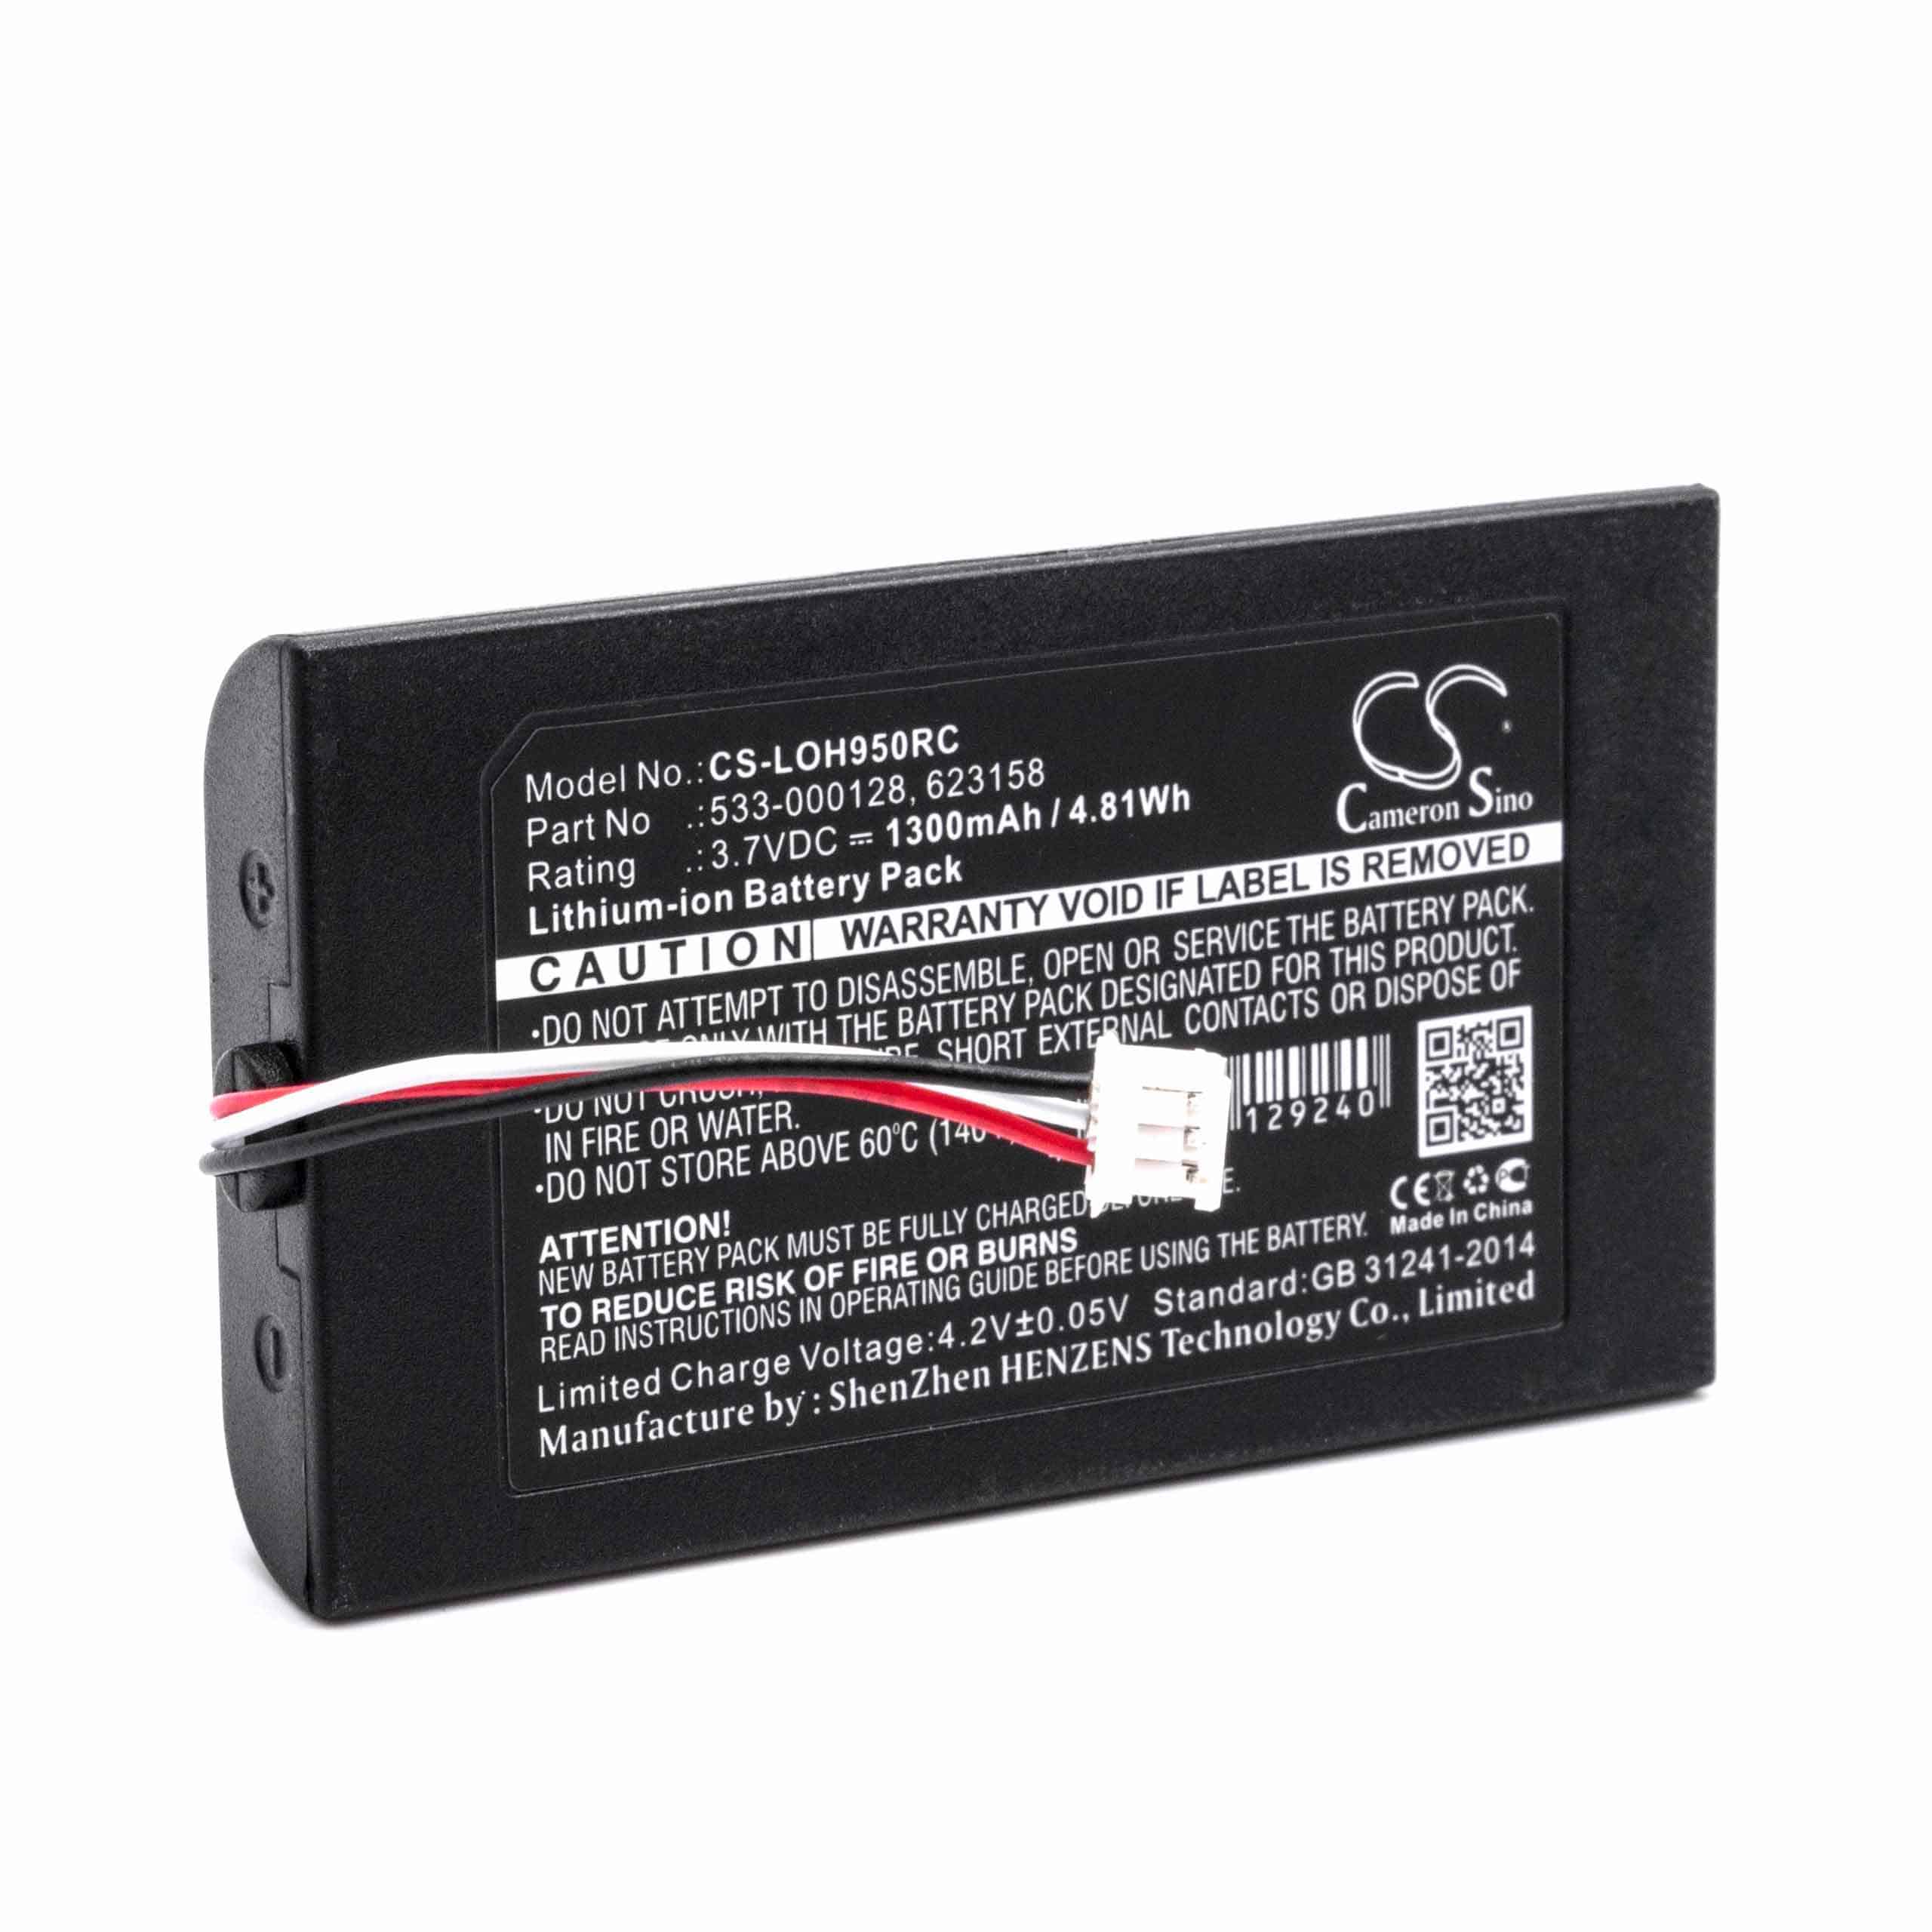 Remote Control Battery Replacement for Logitech 623158, 533-000128 - 1300mAh 3.7V Li-Ion